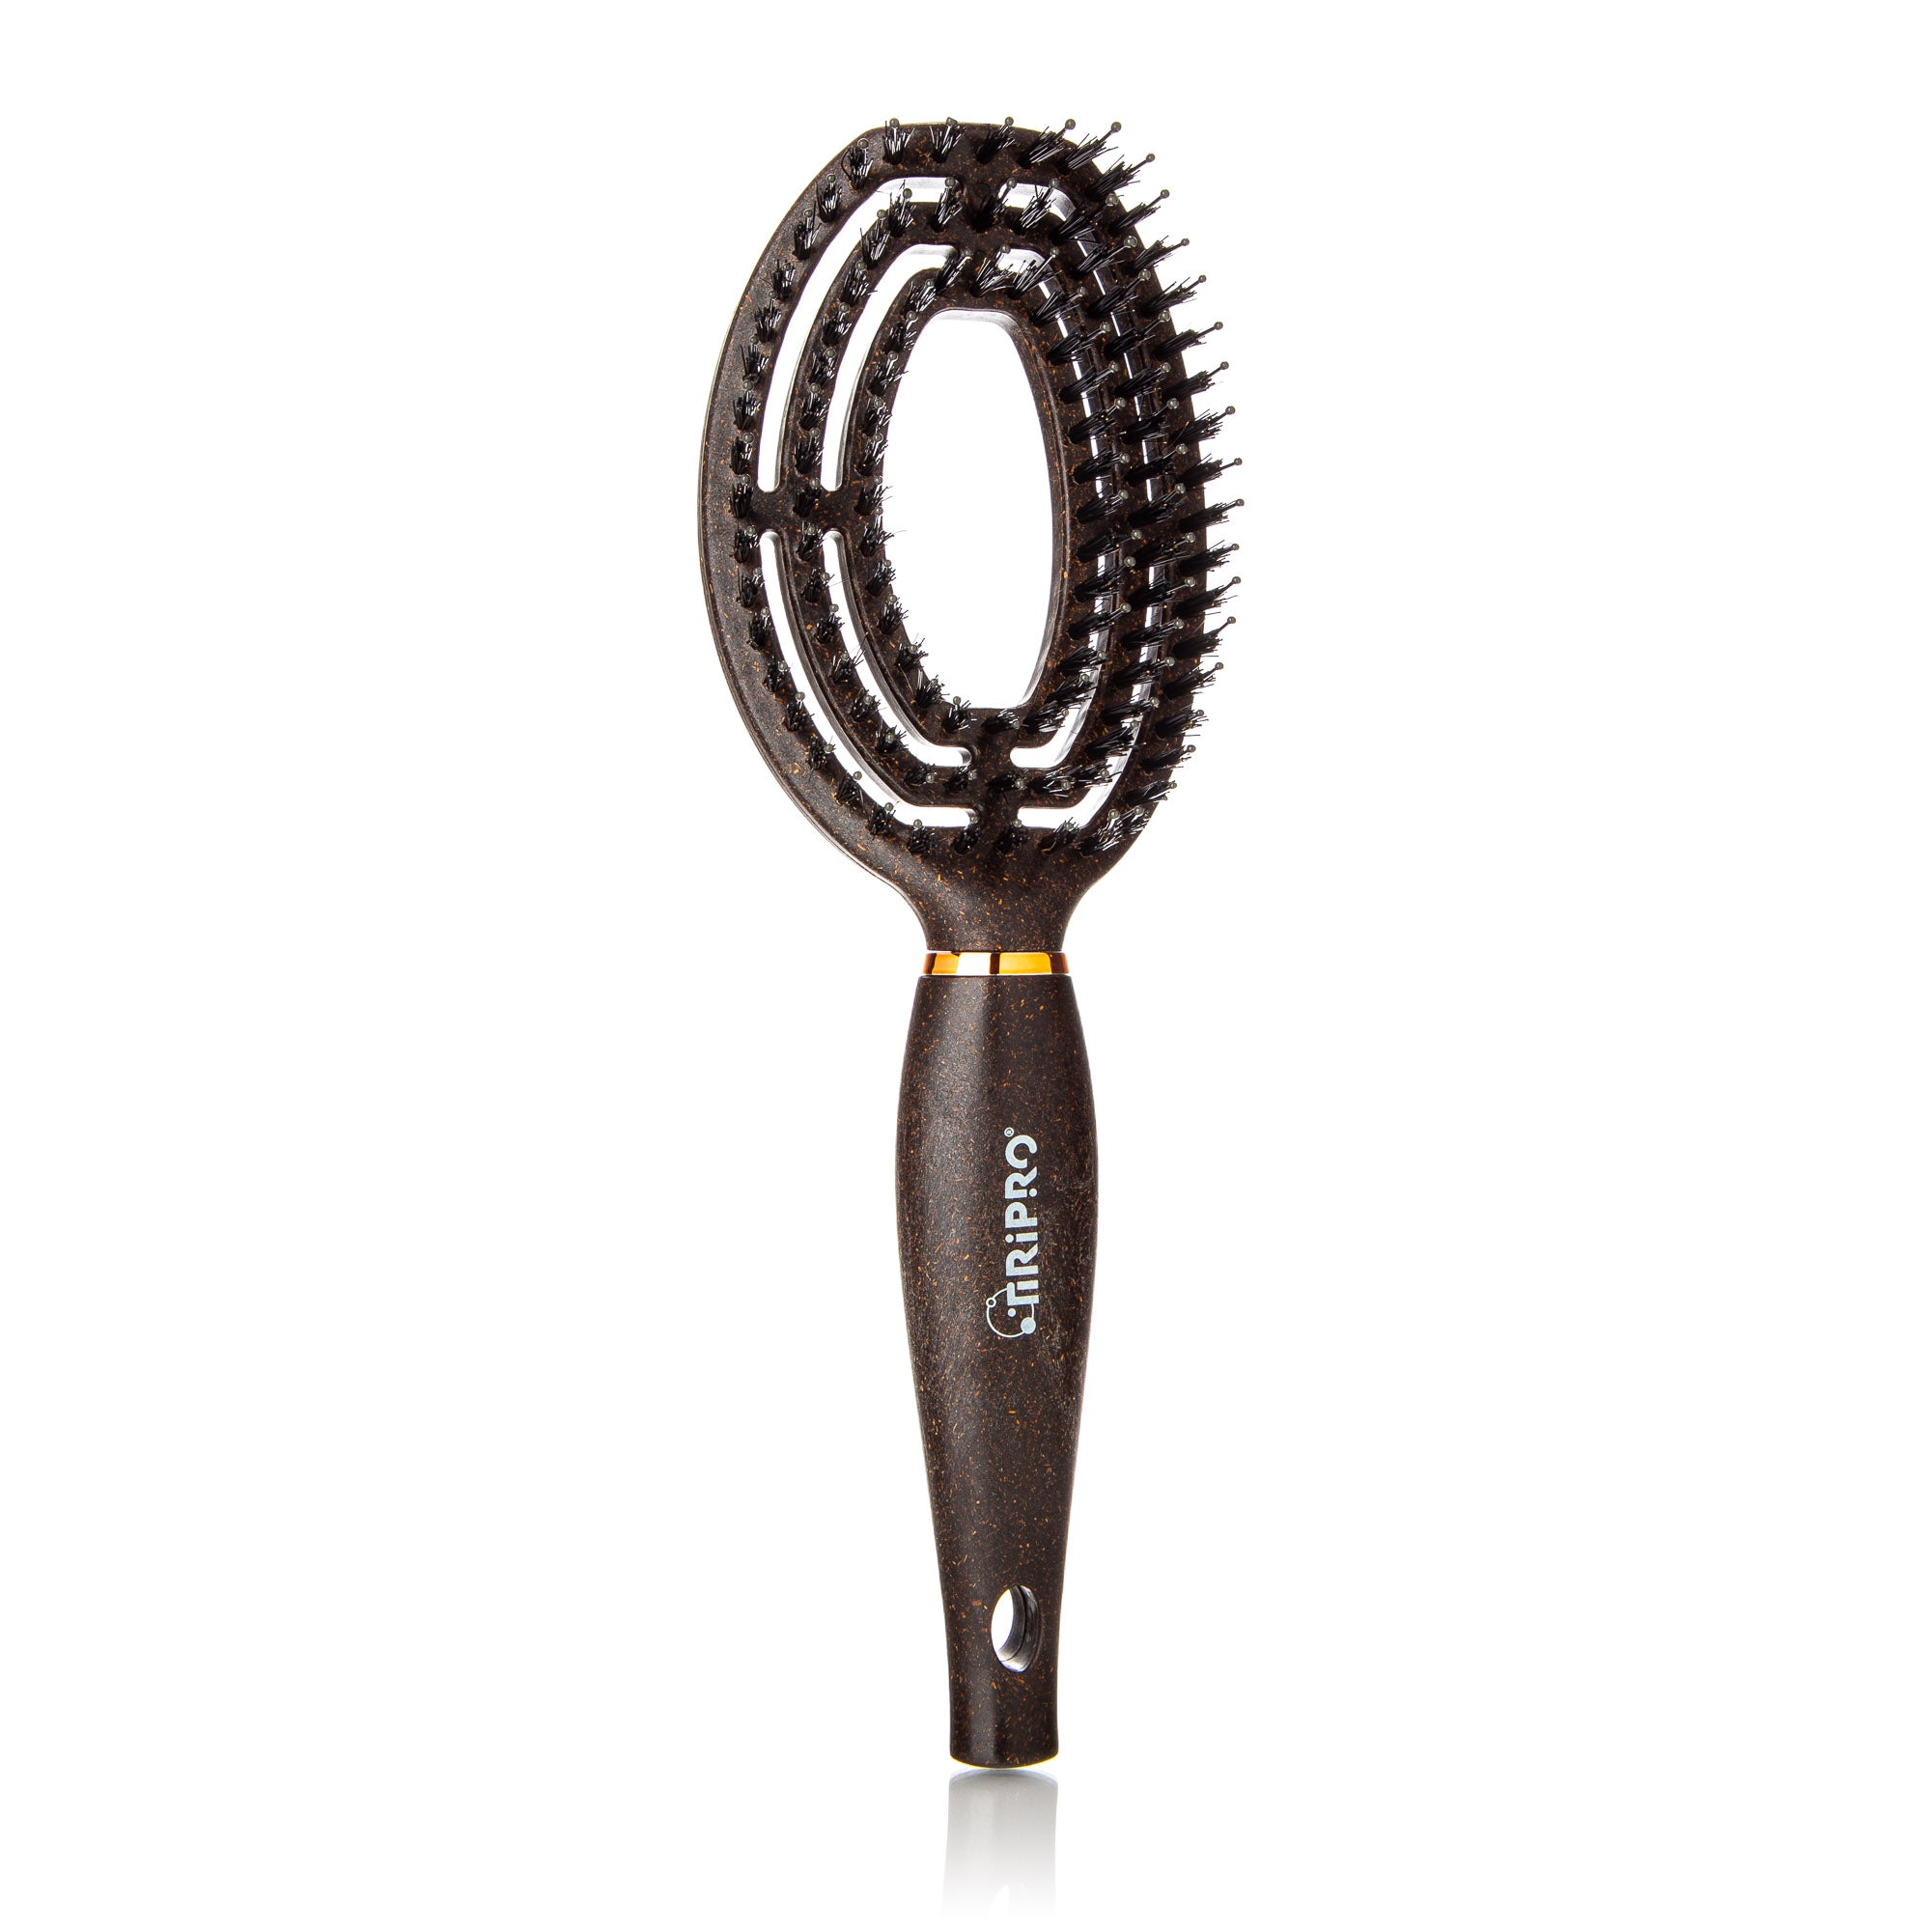 Thermal Resistant 2in1 Hair Brush with Vented Spiral Design - Coffee Grounds (Brown)